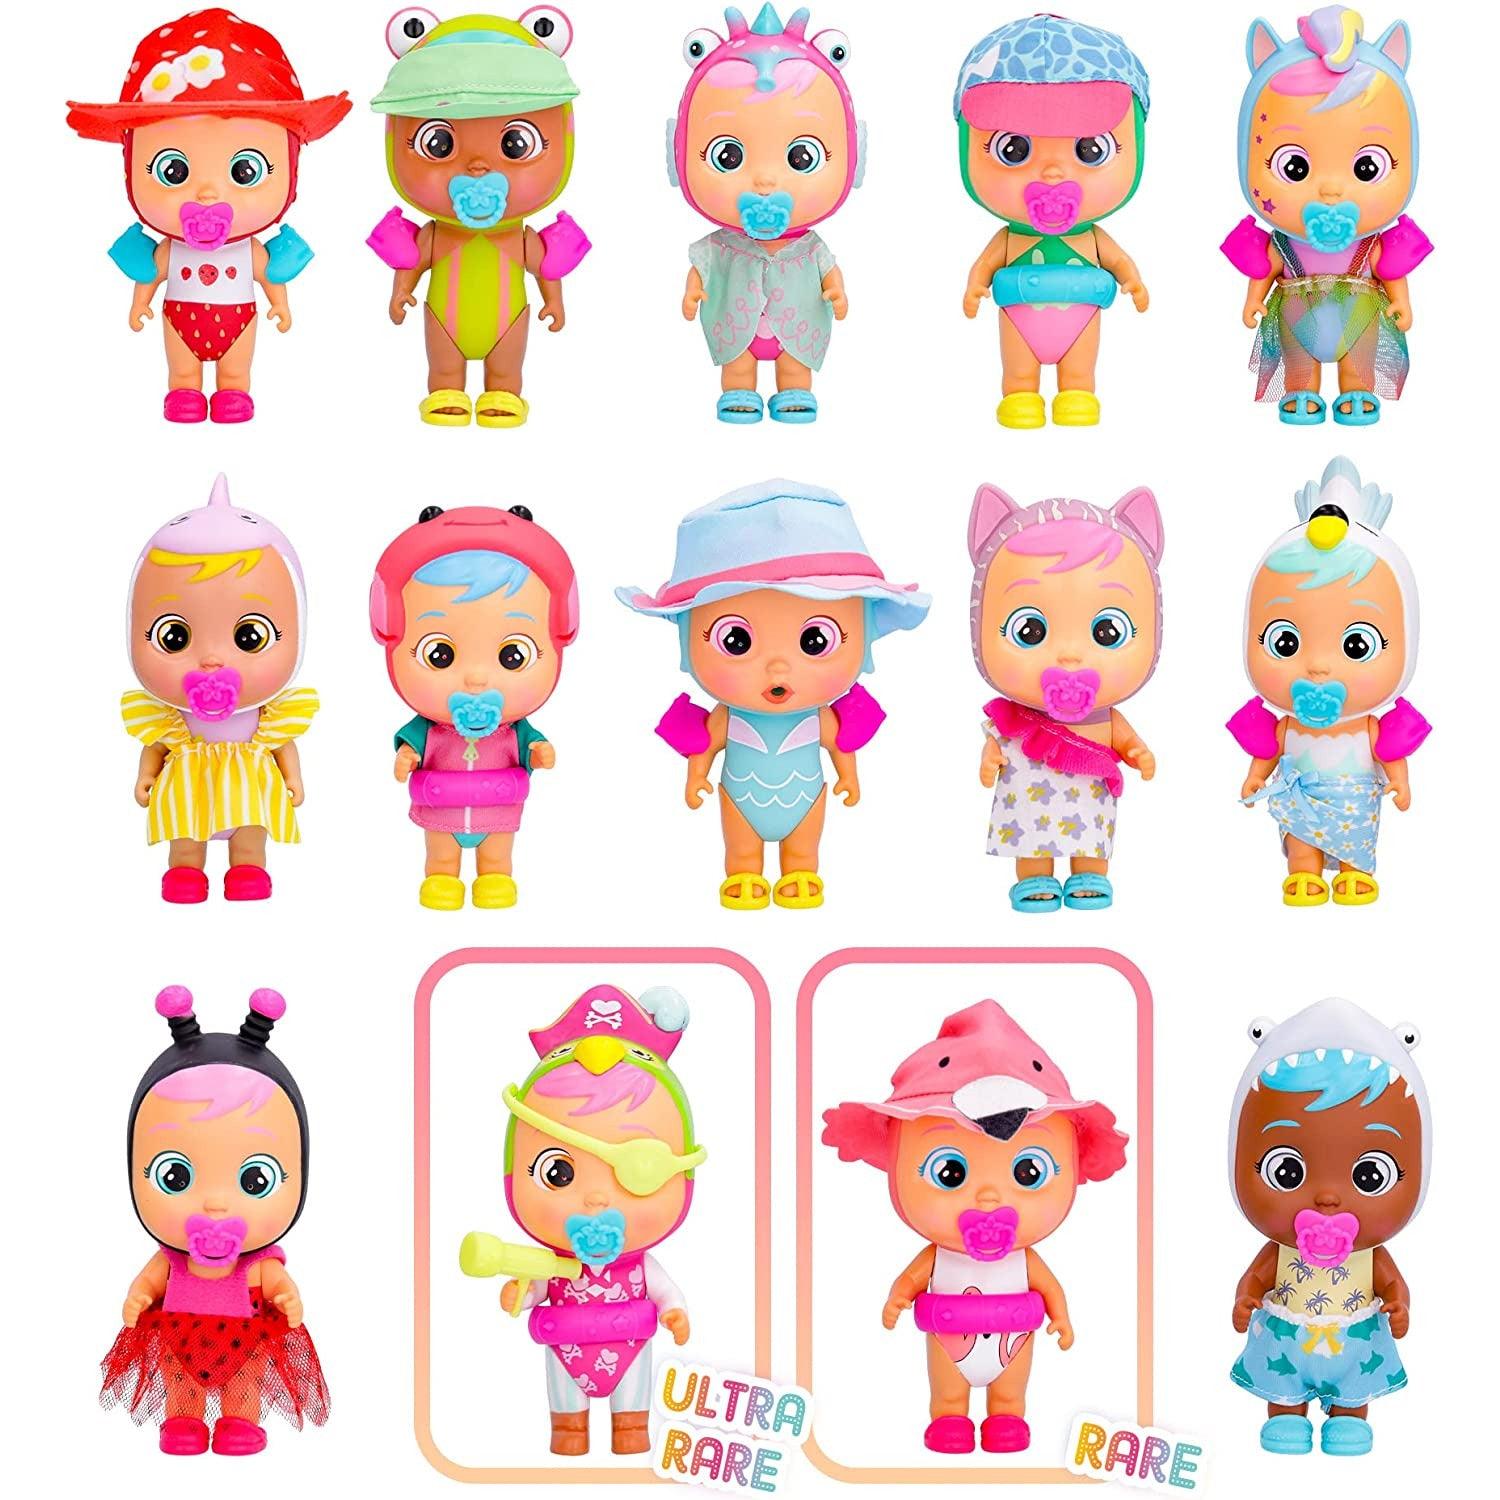 Cry Babies Magic Tears Tropical World - Beach Babies Series | 8+ Surprises, Accessories, Surprise Doll - BumbleToys - 5-7 Years, Girls, Miniature Dolls & Accessories, OXE, Pre-Order